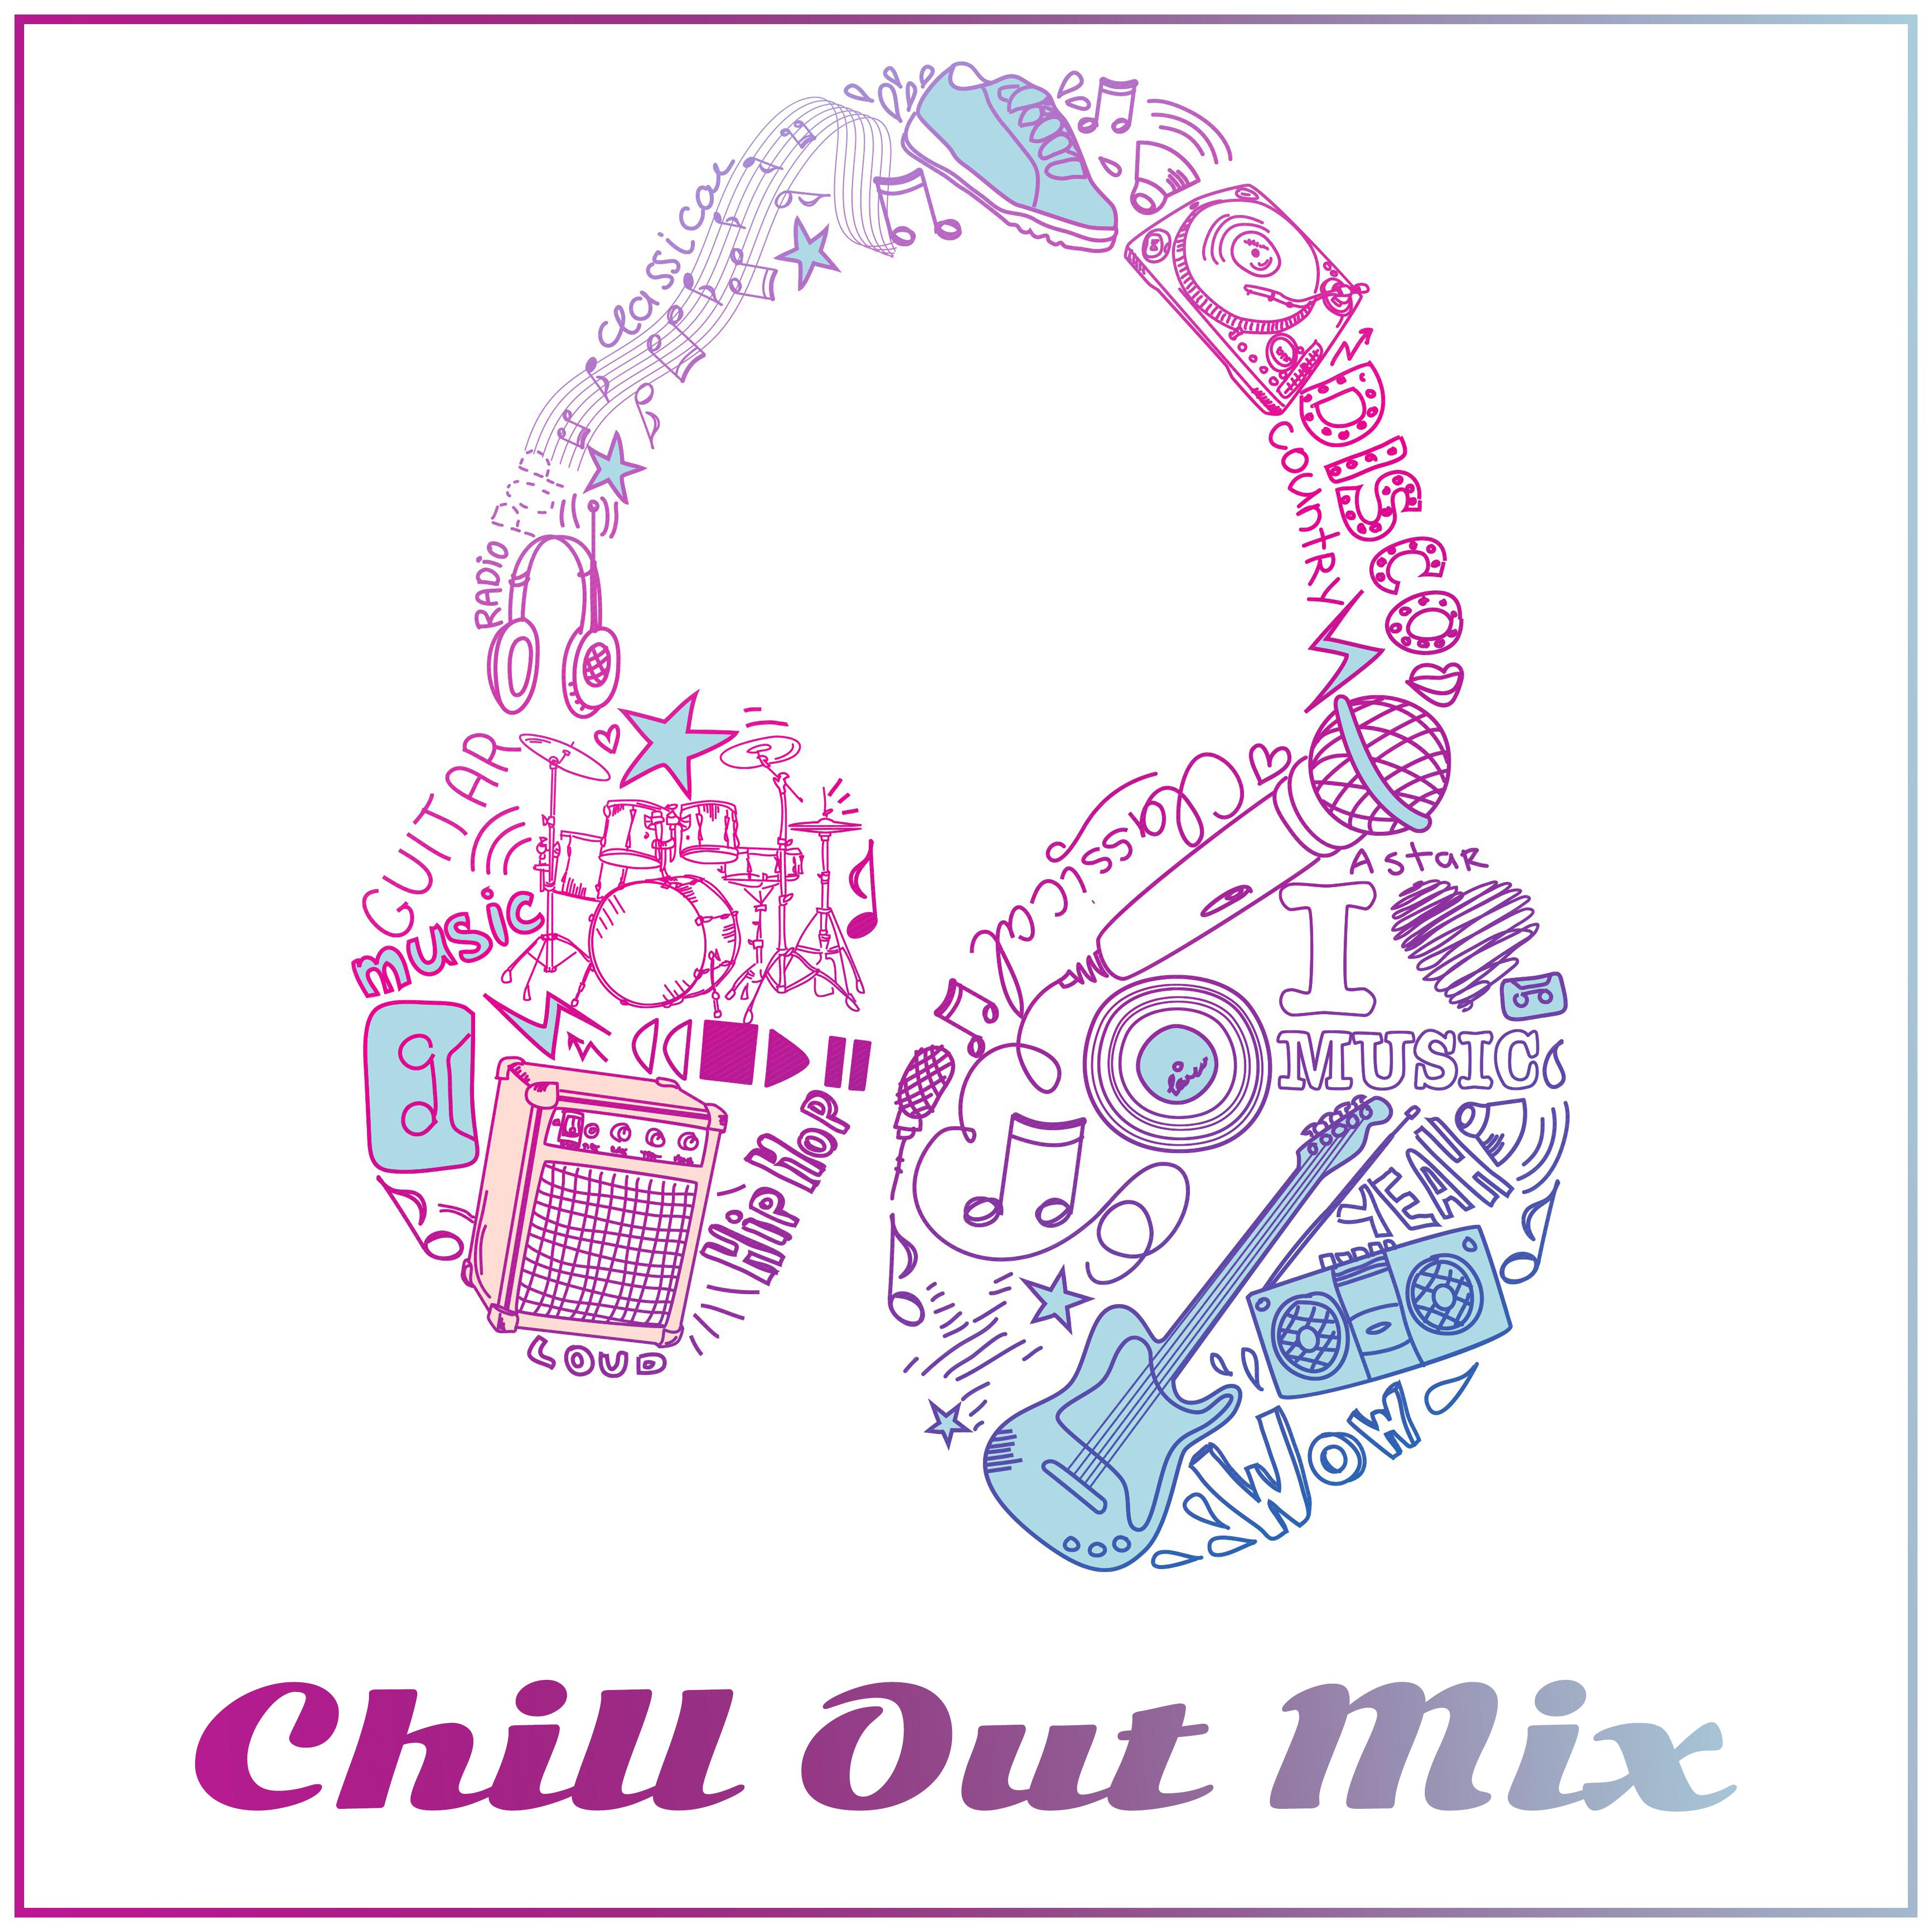 Chill Out Mix  Relaxing Music, Summer Chill, Mellow Chillout, Beach Party, Ambient Music, Asian Chill, Barcelona Chill Out